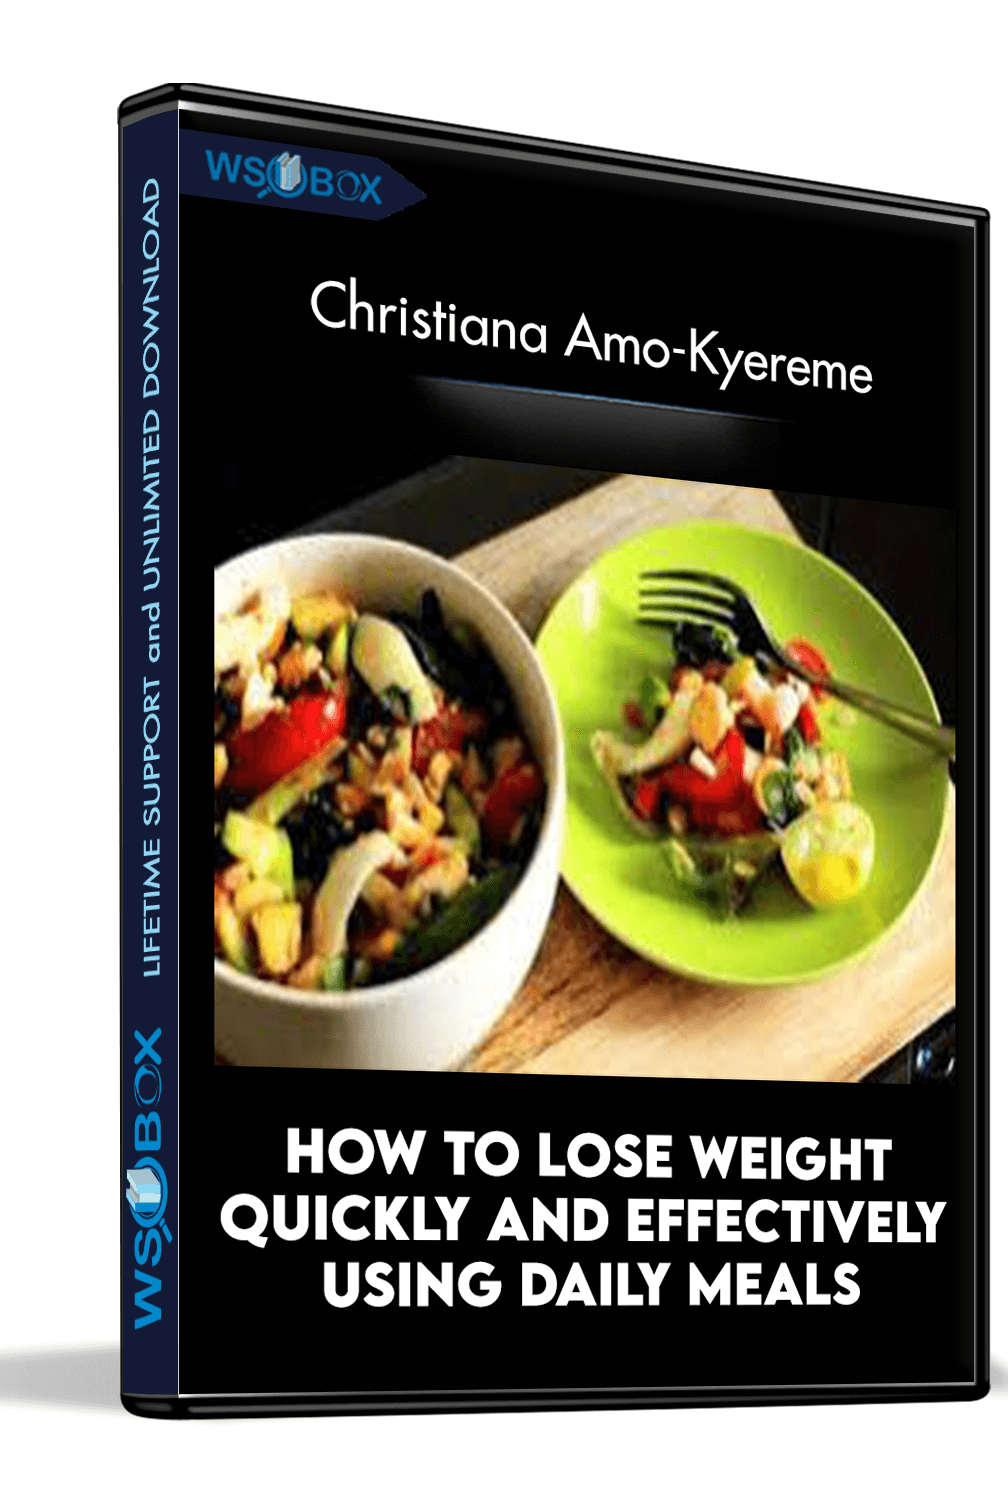 How to lose weight quickly and effectively using daily meals – Christiana Amo-Kyereme